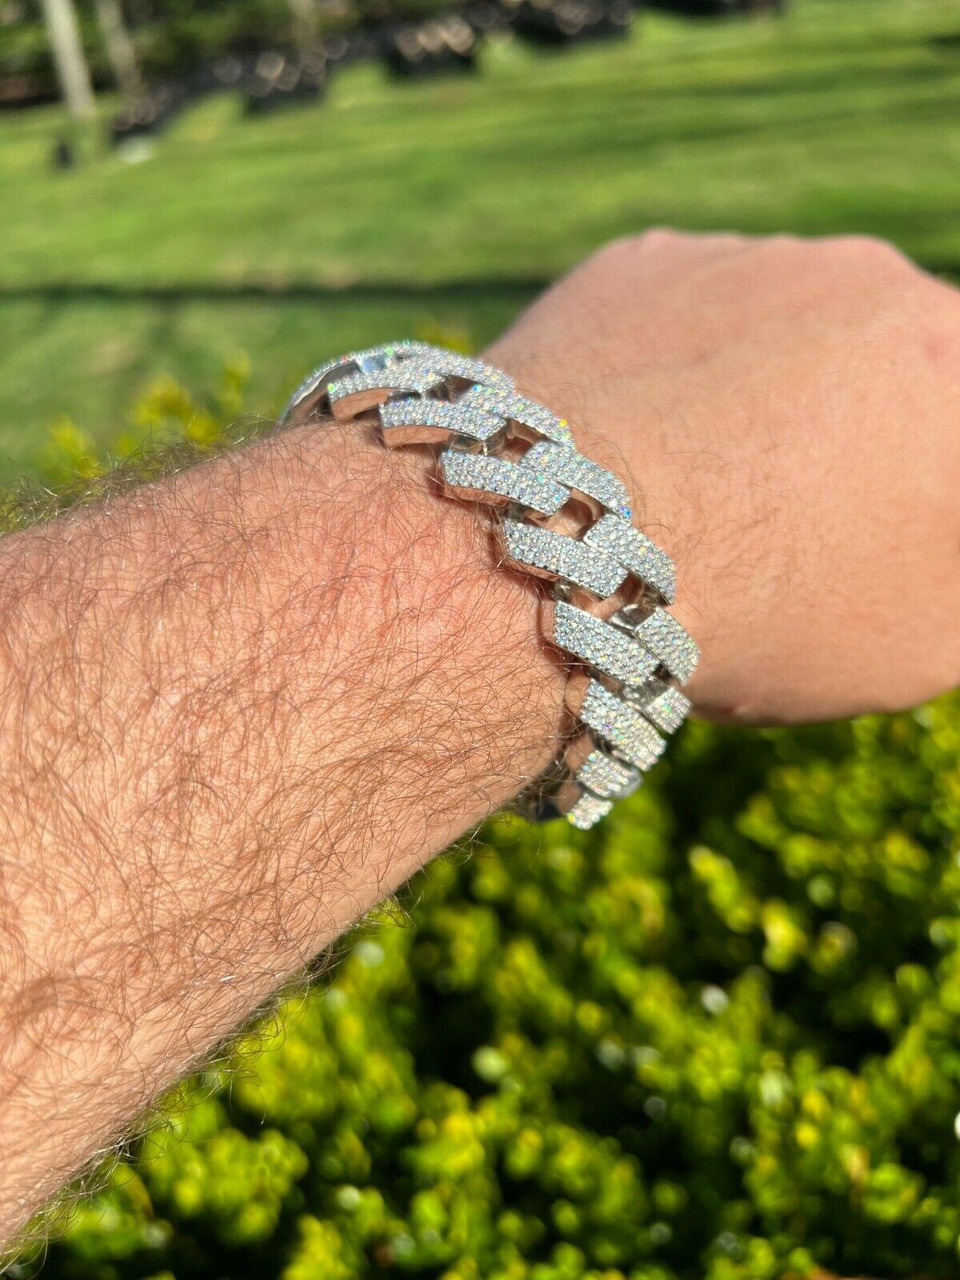 I bought a bracelet and its a bit too big. Is there anyway to make it  smaller or someone I could go to readjust the size? : r/jewelry